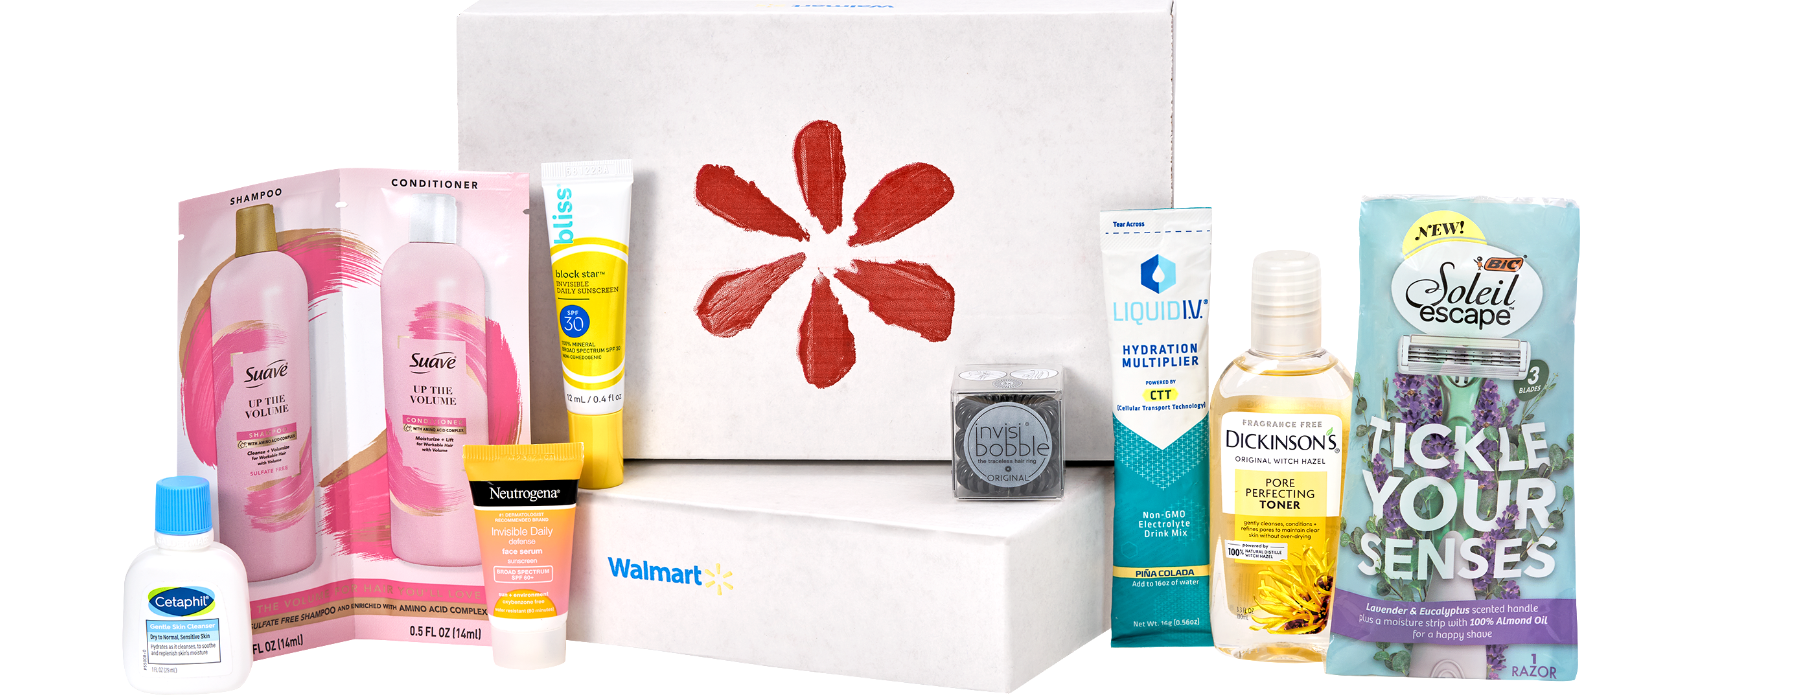 Grab the Walmart Beauty Box for just .98! (Summer Now Available!)